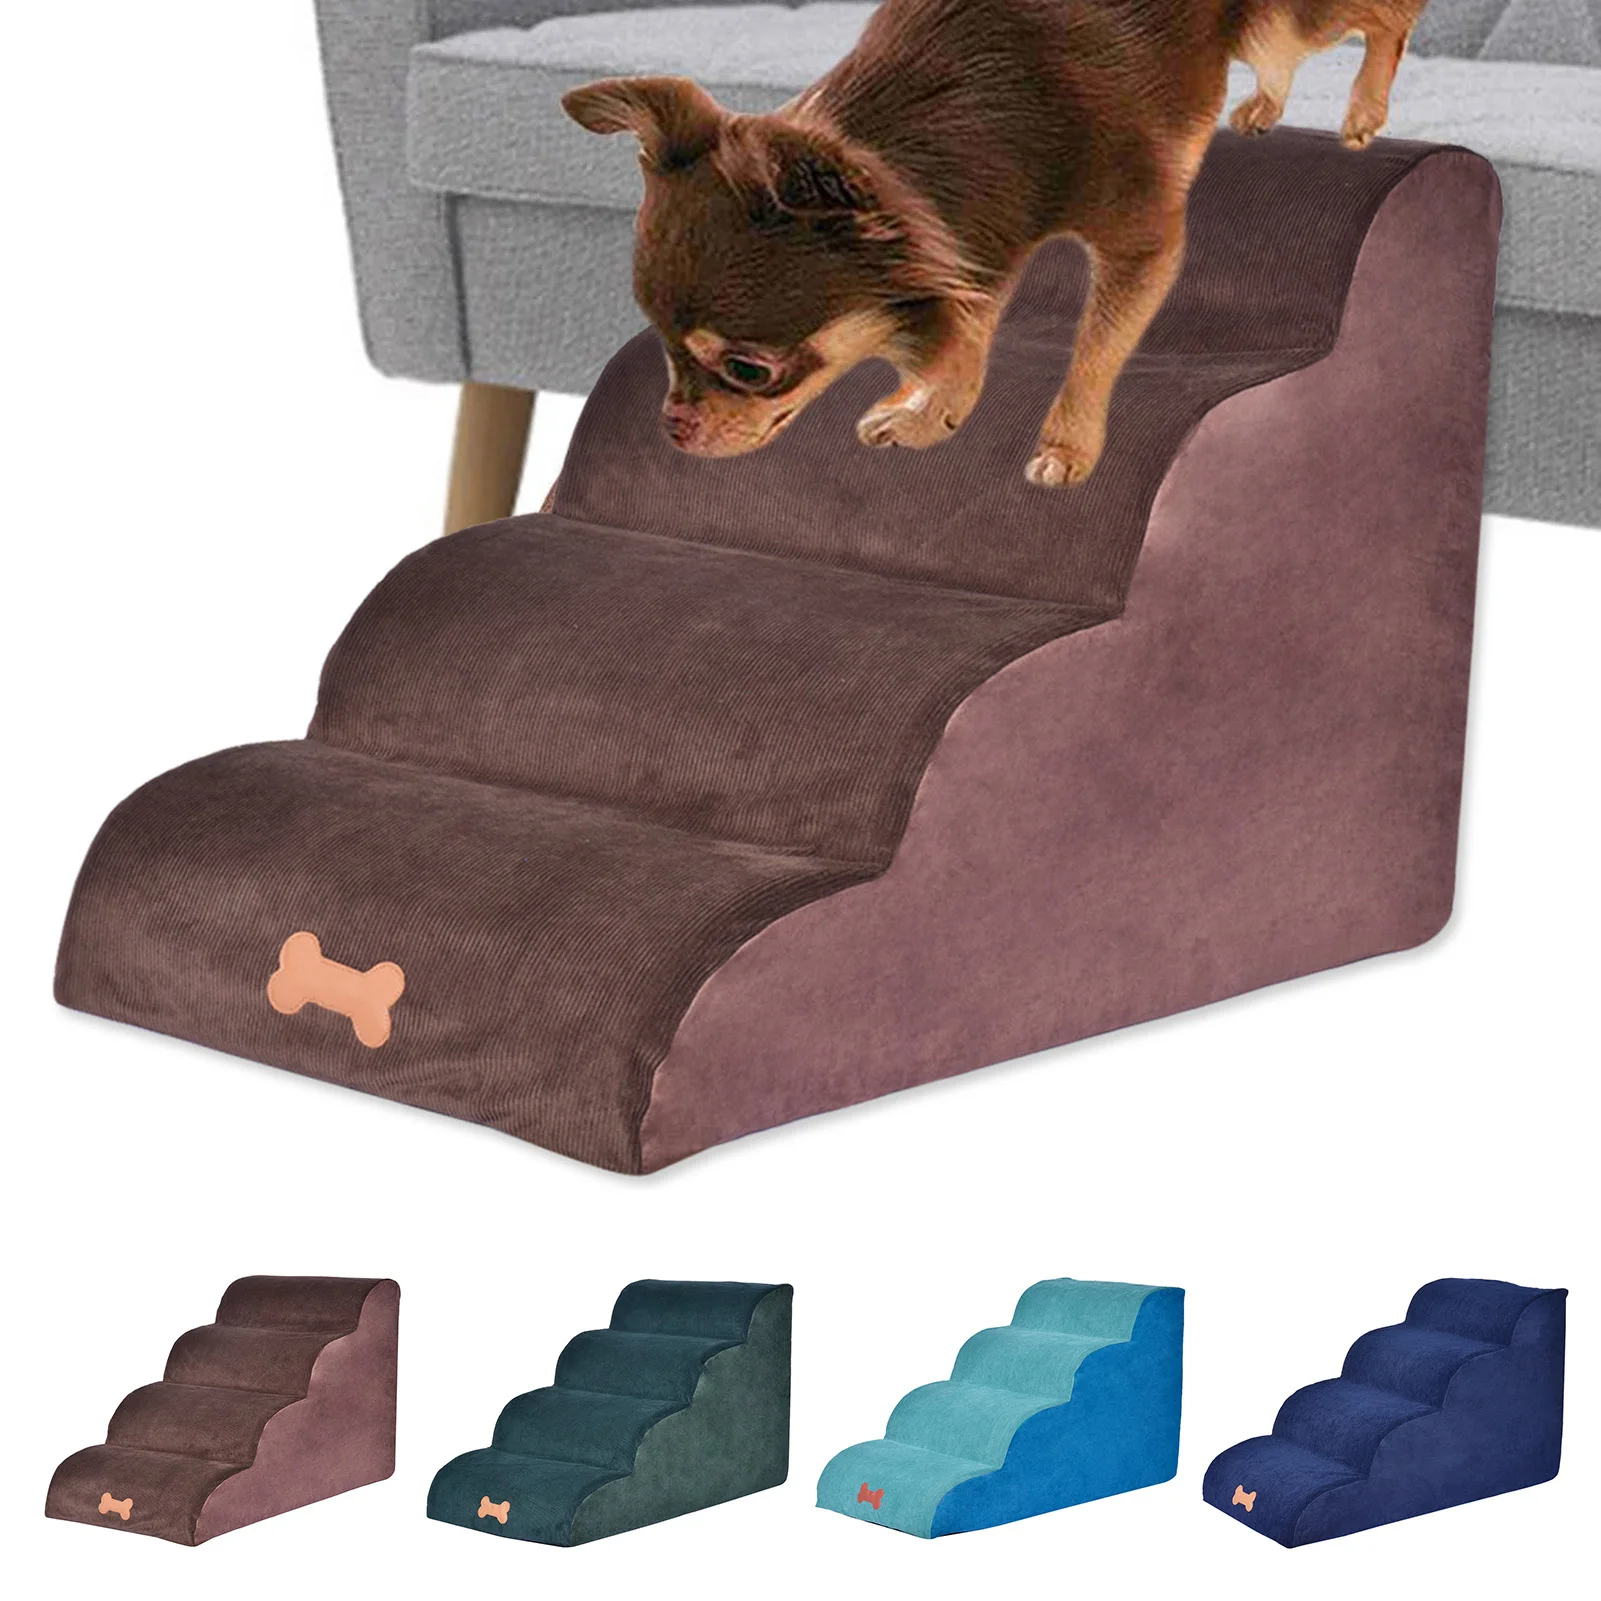 Dog Stairs 4 Steps Pet Stairs Dog House For Small Dog Cat Pet Ramp Ladder Anti-slip Removable Dogs Bed Stairs